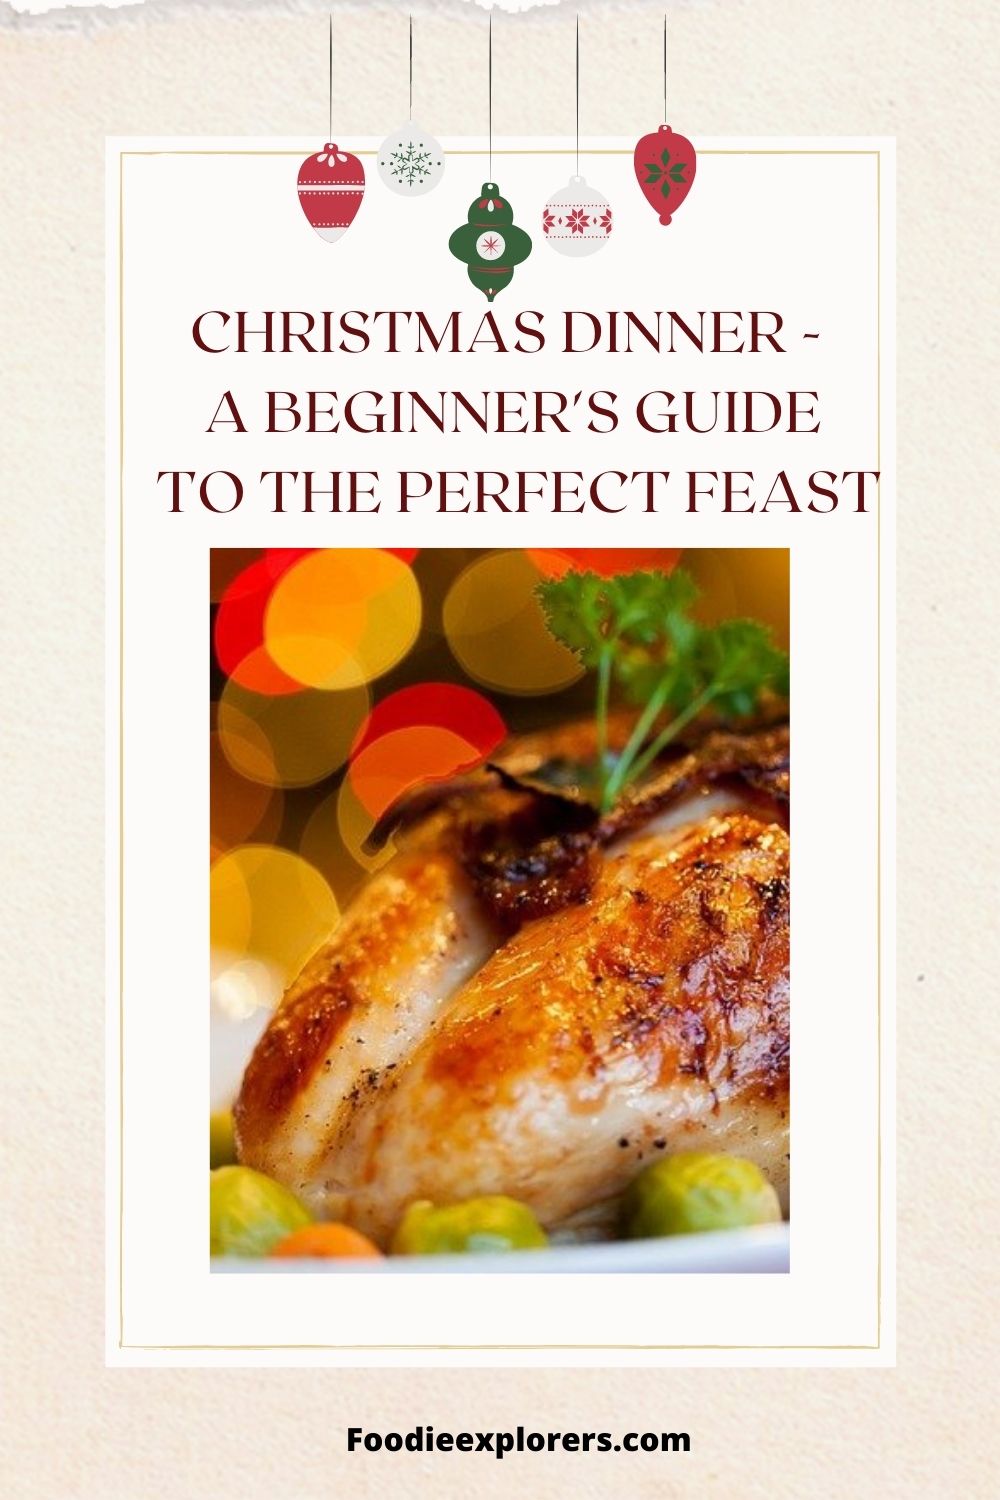 Christmas dinner - A beginner's guide to the perfect feast